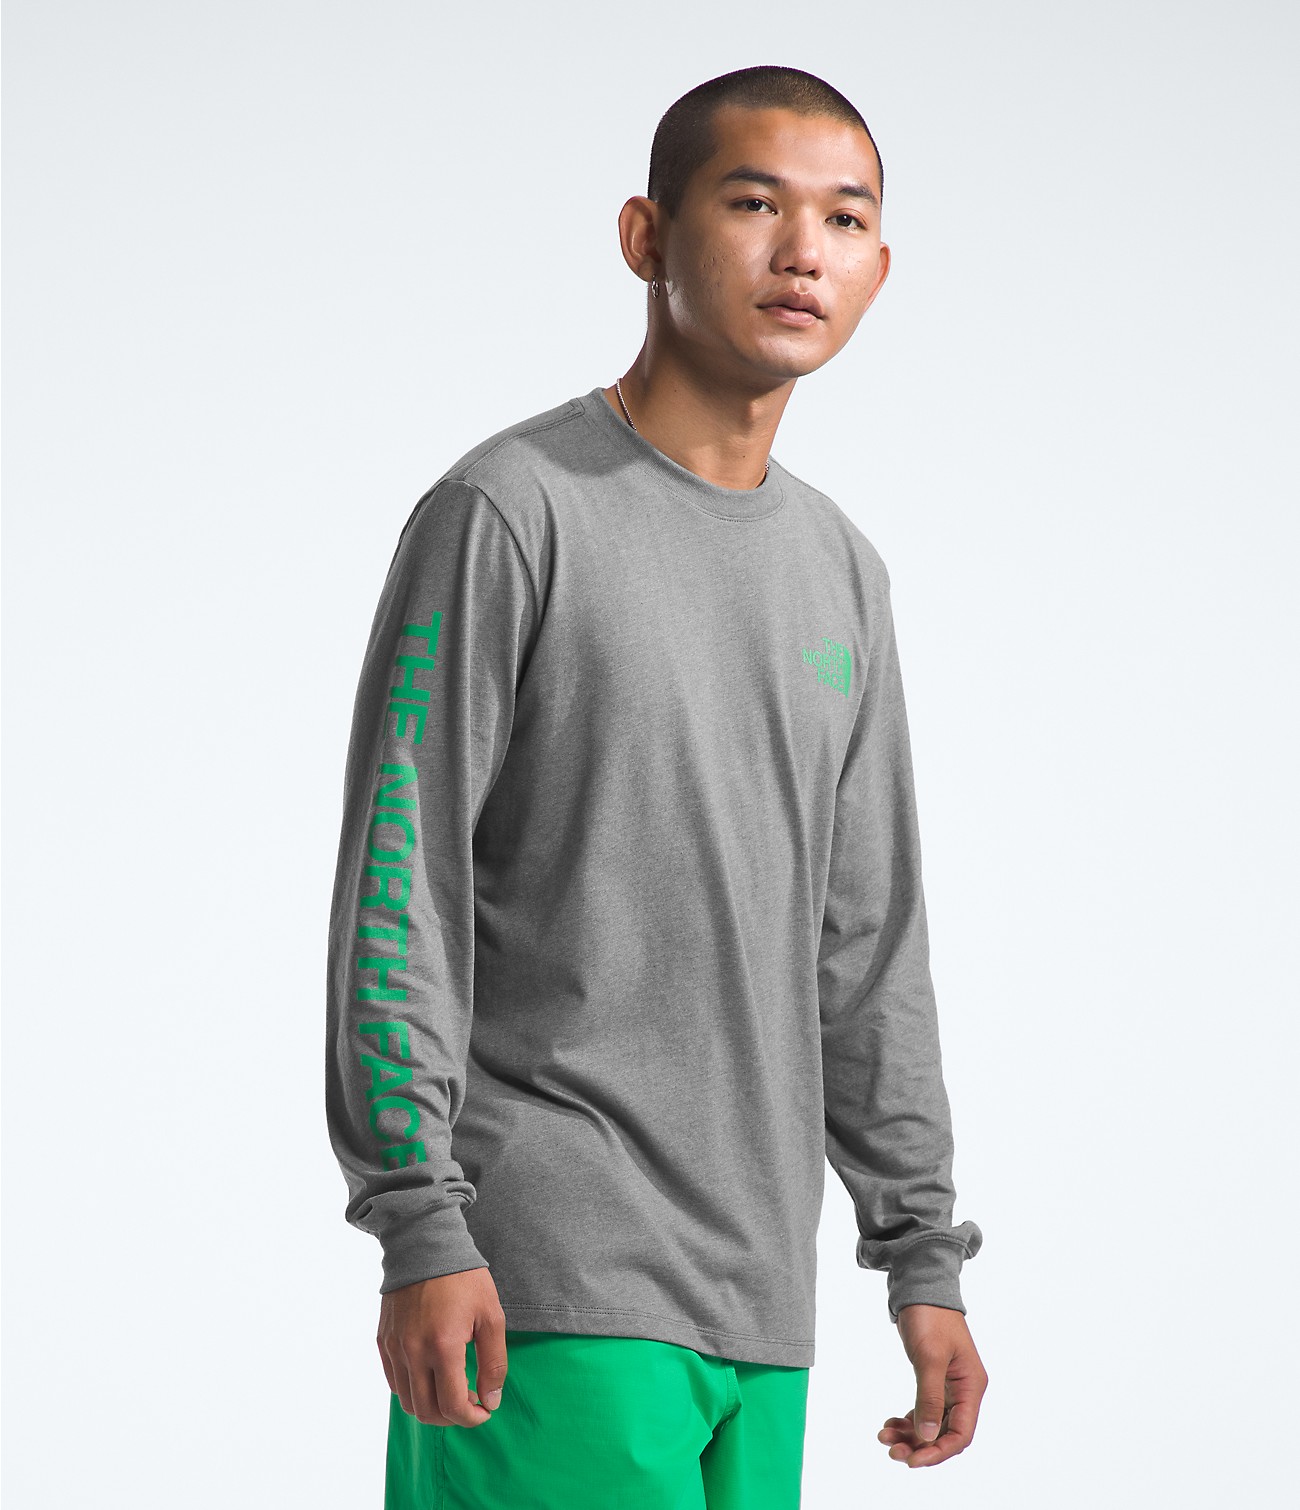 Men’s Long-Sleeve Sleeve Hit Graphic Tee | The North Face